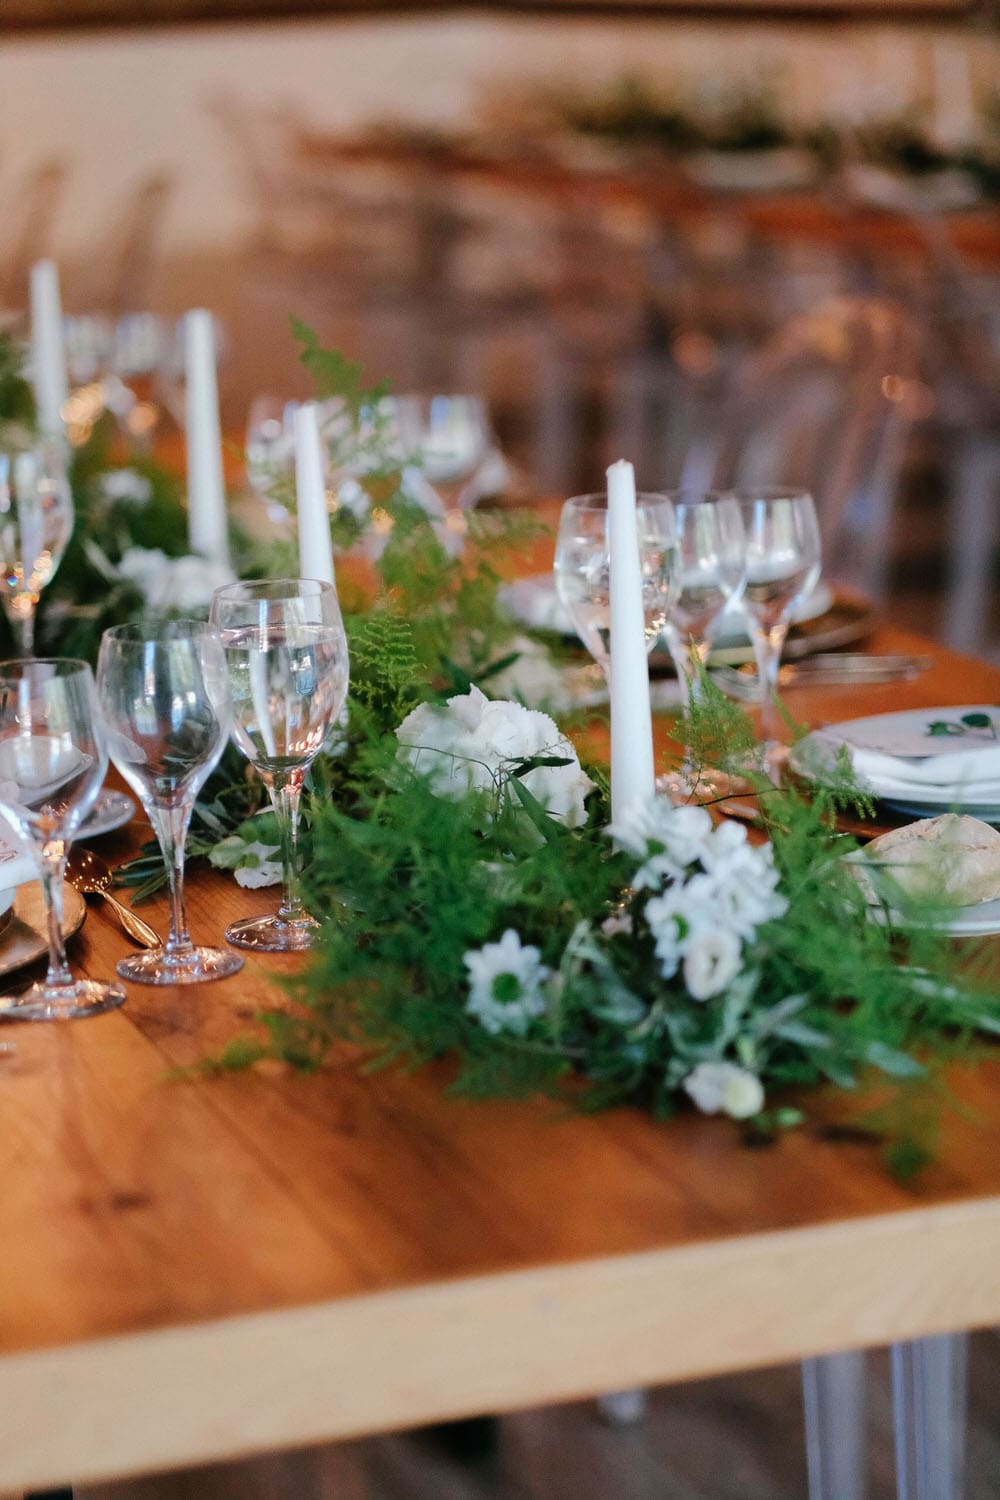 Close-up of the floral decoration and menu on the tables of the Quinta da Bichinha wedding hall